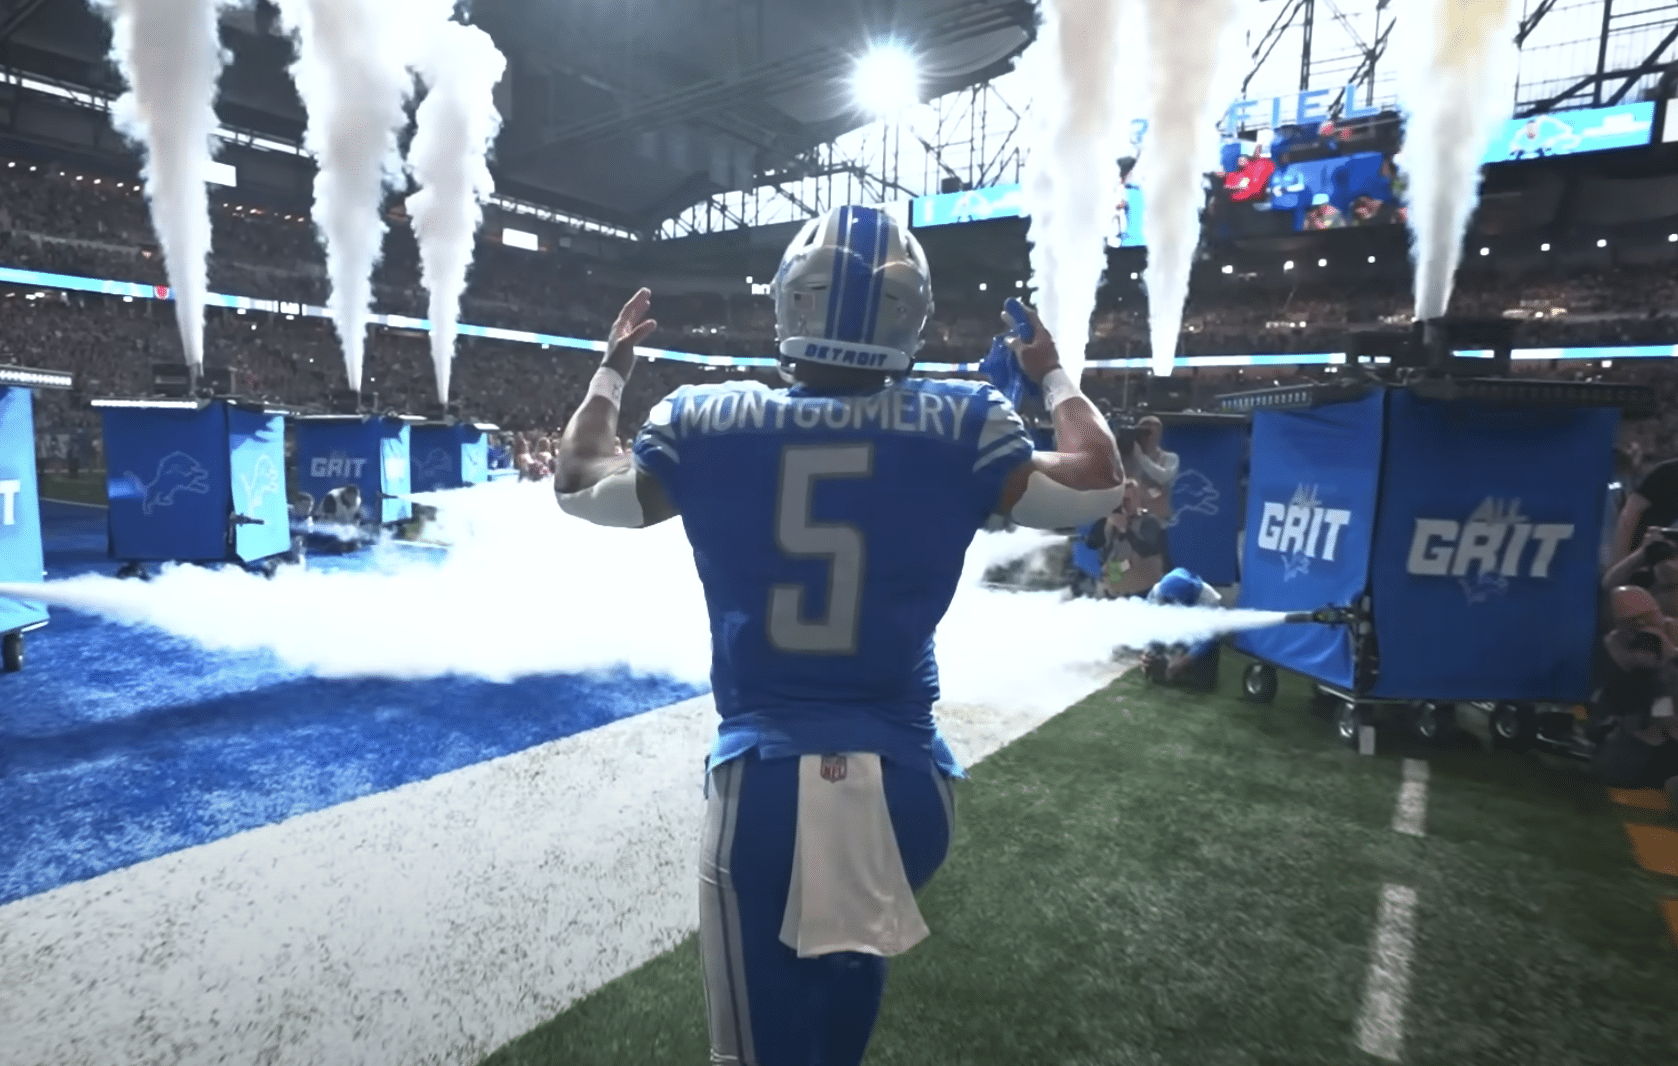 Detroit Lions Week 15 Rooting Guide David Montgomery and Jahmyr Gibbs have shot at history David Montgomery David Montgomery on Detroit Lions fans